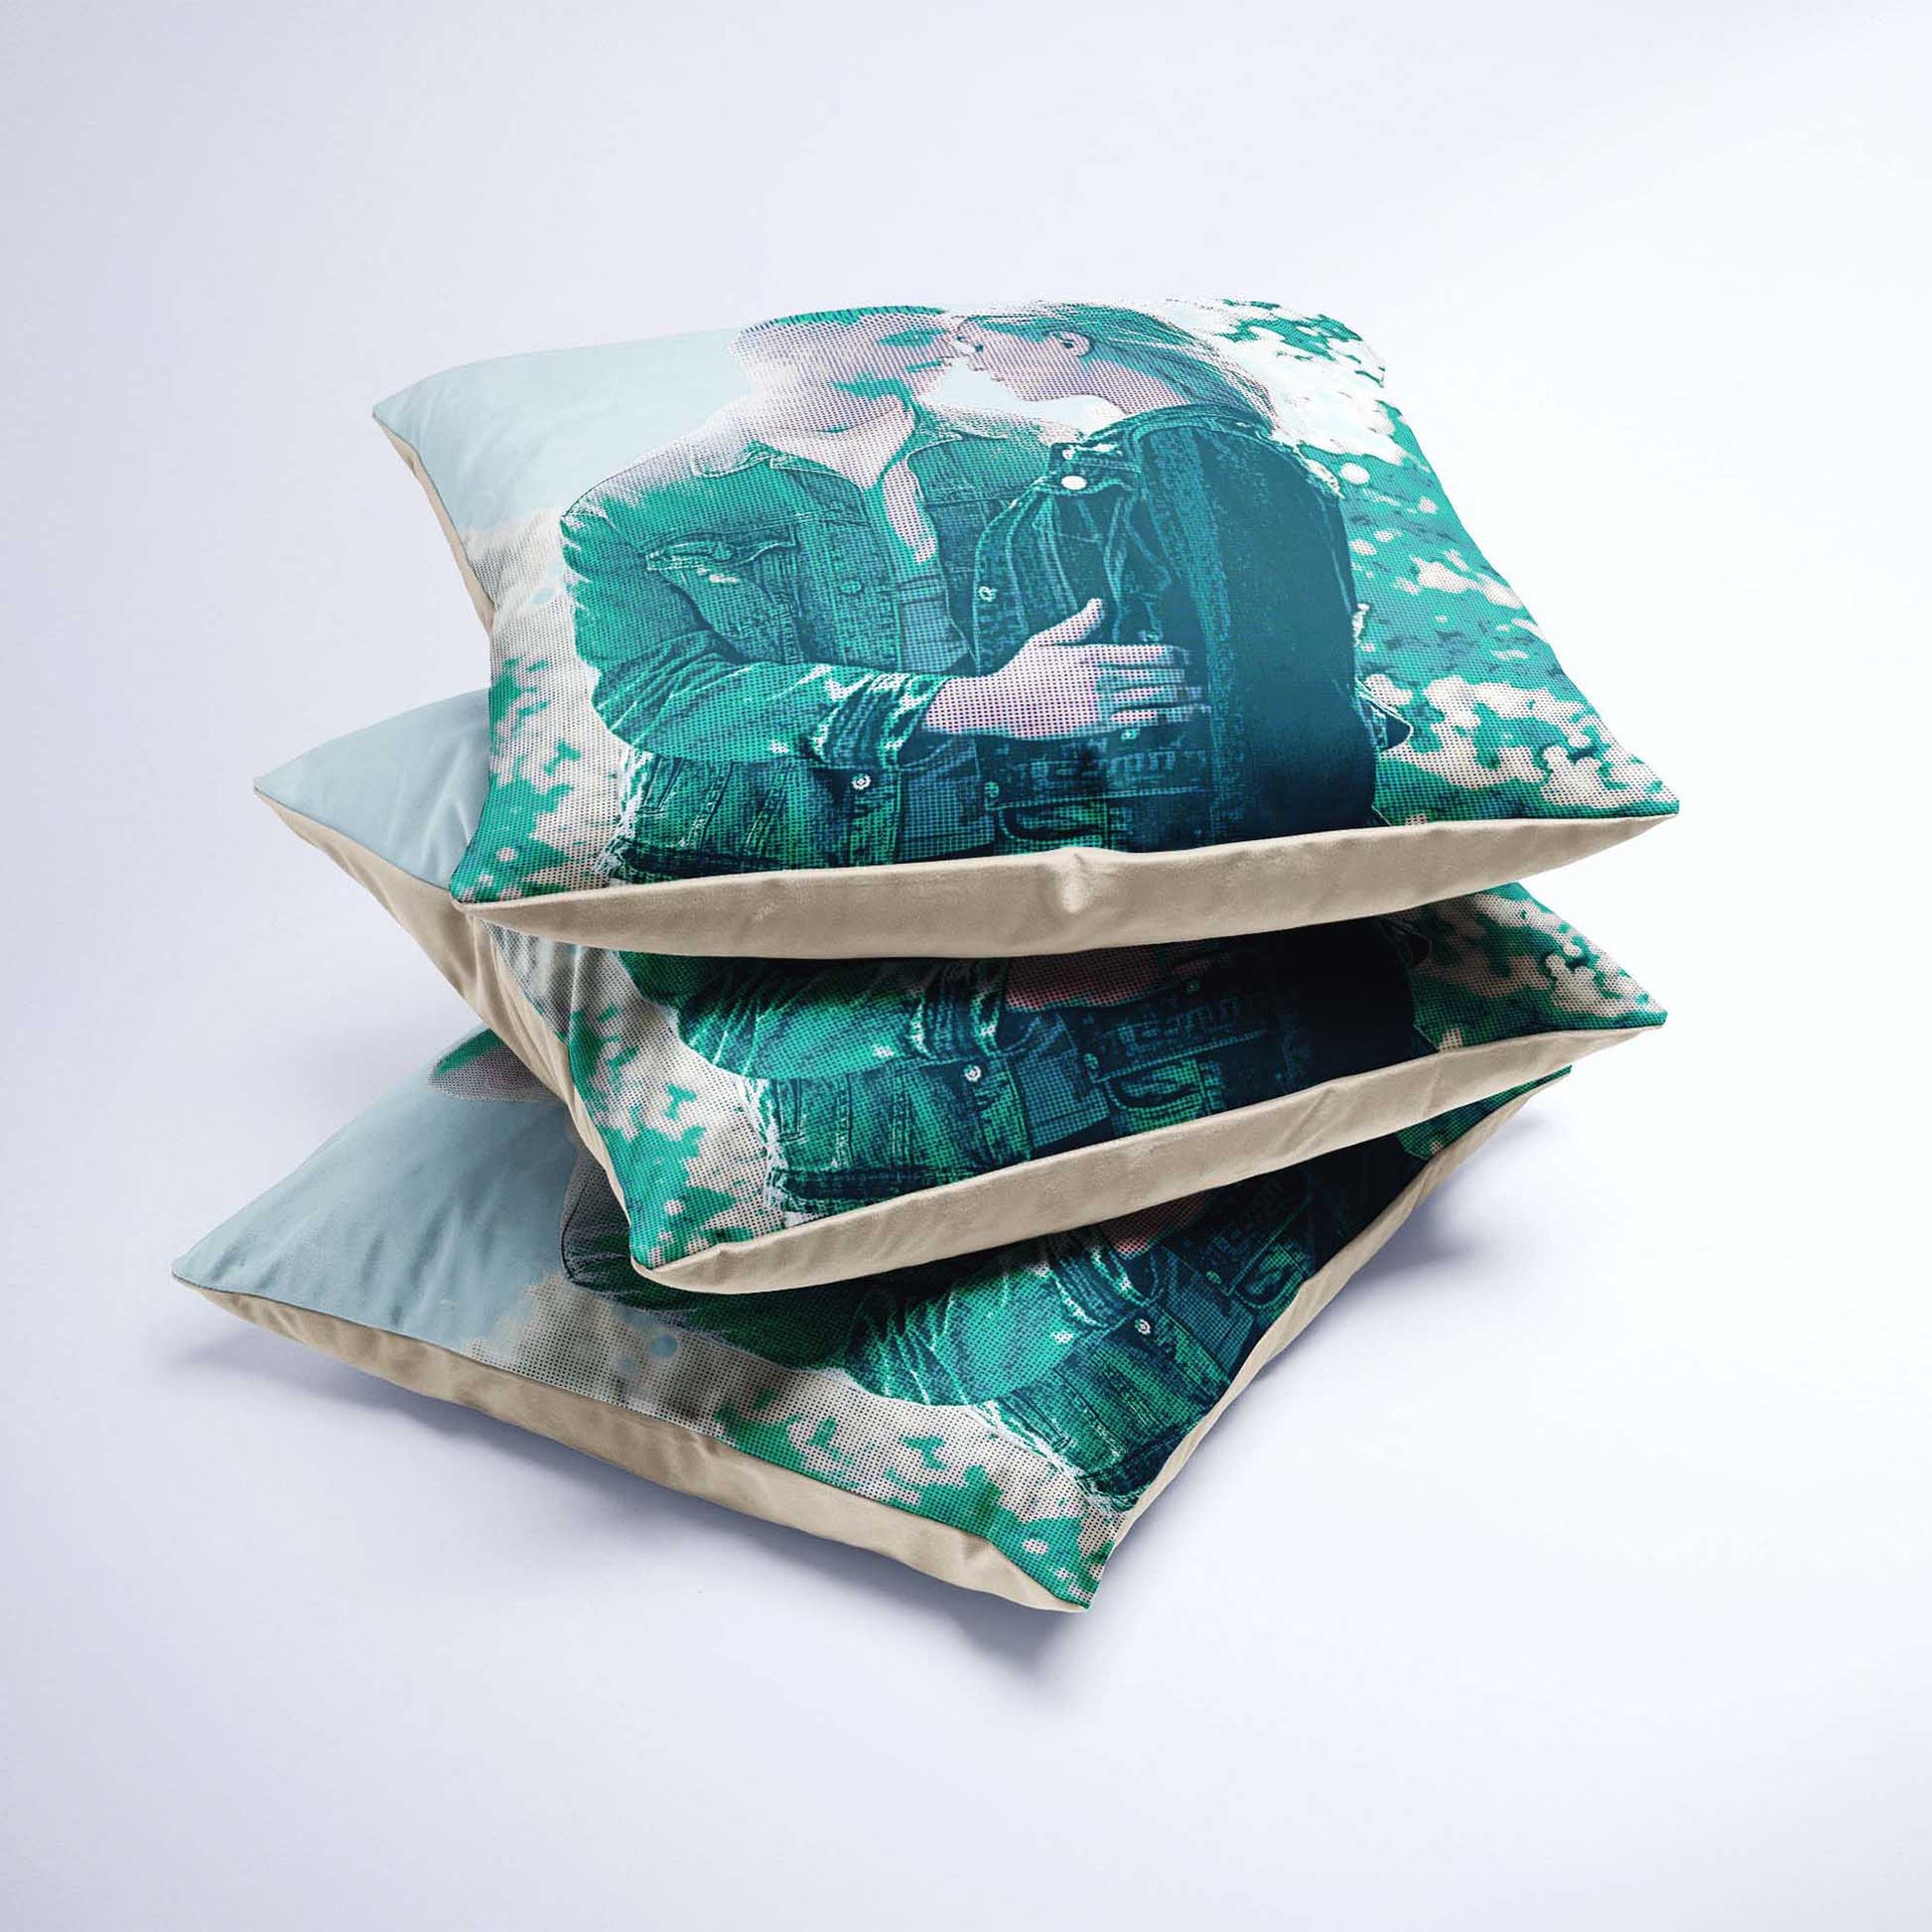 Experience the perfect blend of comfort and style with the Personalised Teal Grunge Cushion. Custom printed from your photo, it showcases a unique halftone effect and grunge texture for an old school vibe, handmade